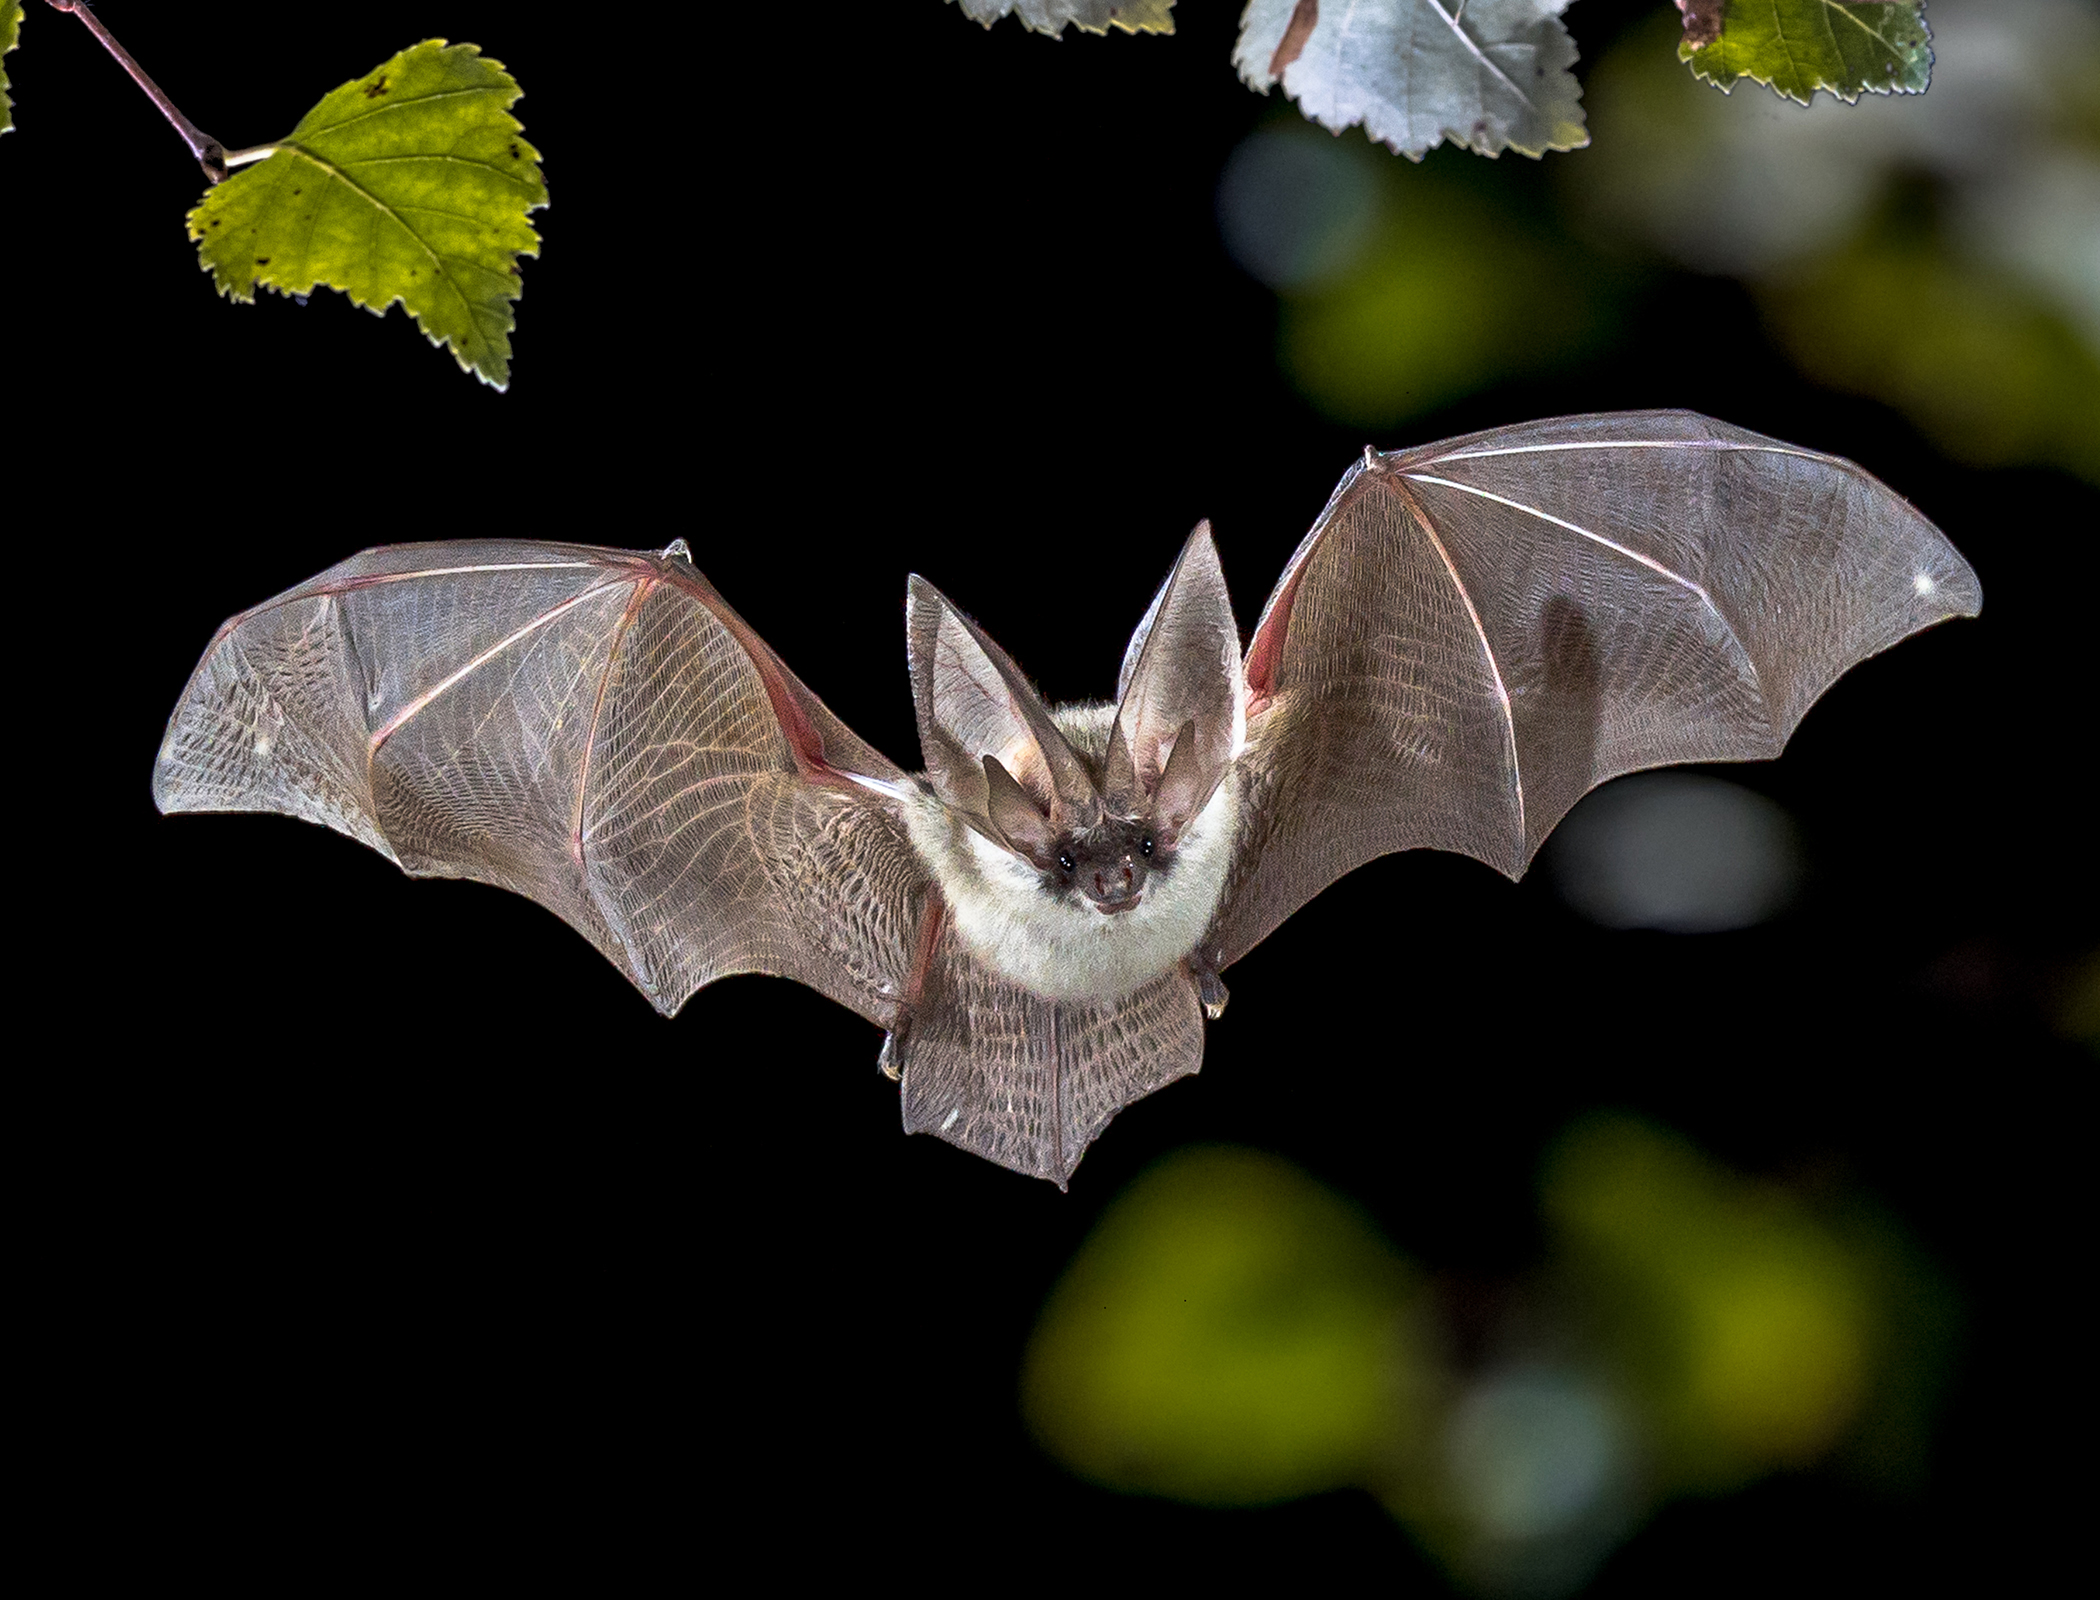 Bugs and bats inspire creation of bionic super 3D cameras